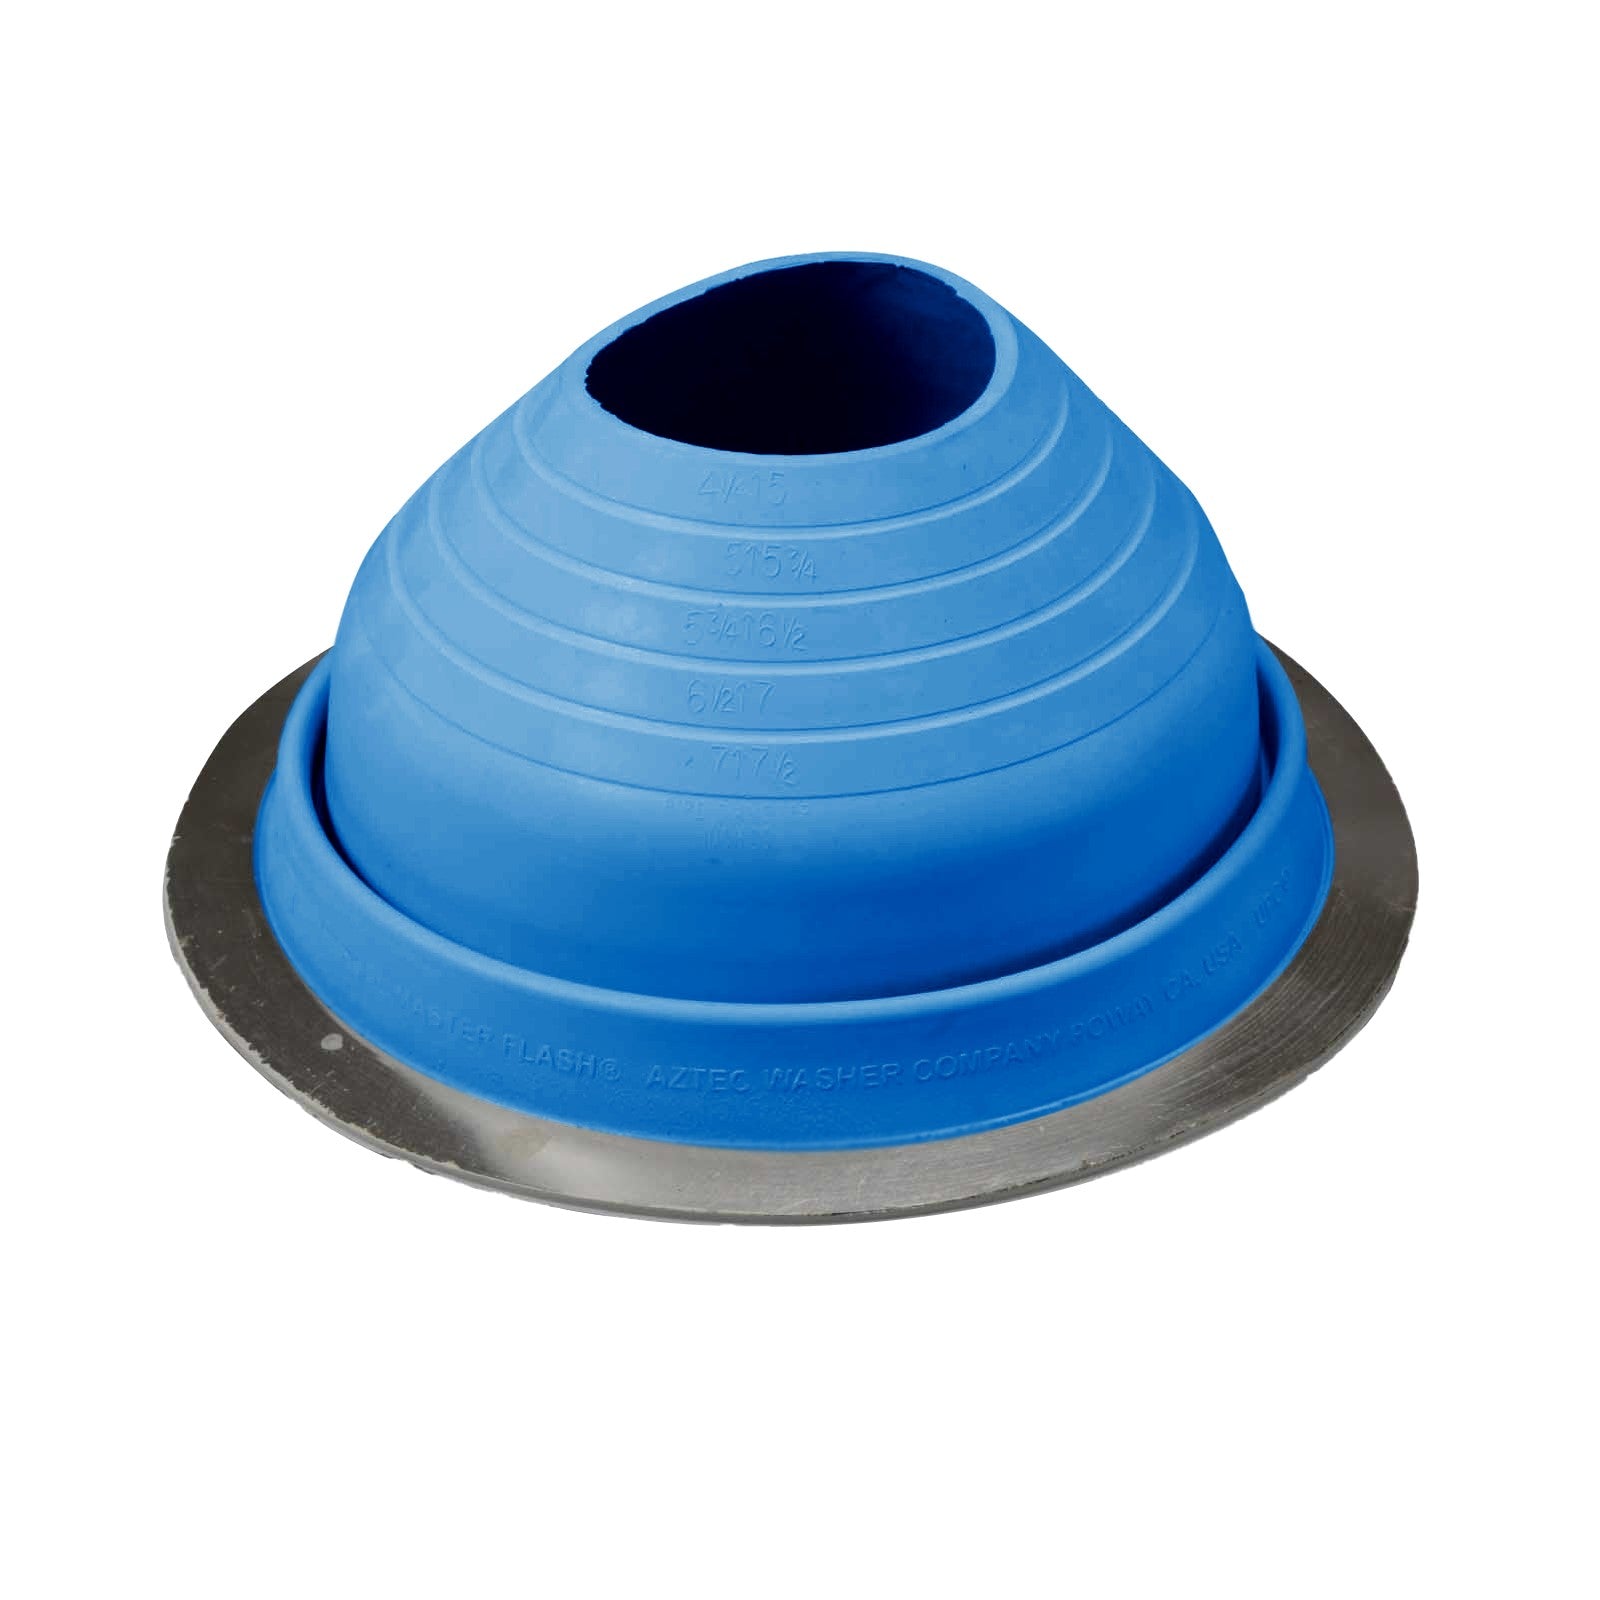 #5 Roofjack Round EPDM Pipe Flashing Boot Light Blue